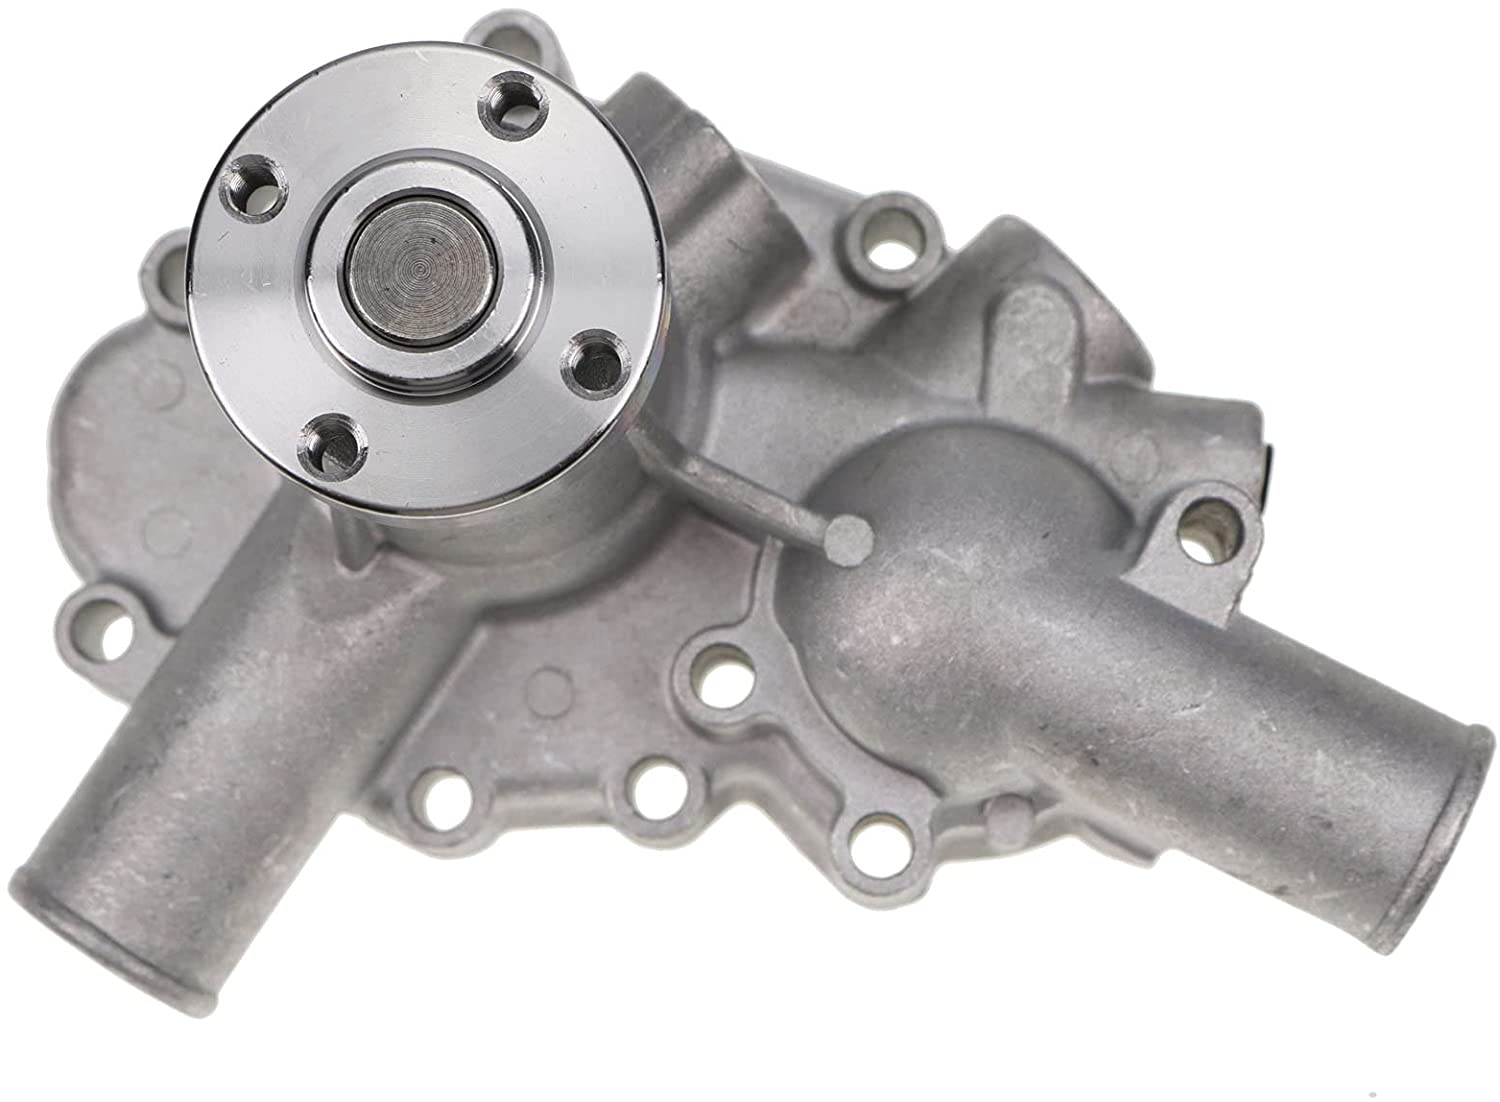 Water Pump with Gaskets 145016474 145016472 145016434 Compatible with Perkins 103-09 103-10 103-11 Engine - KUDUPARTS